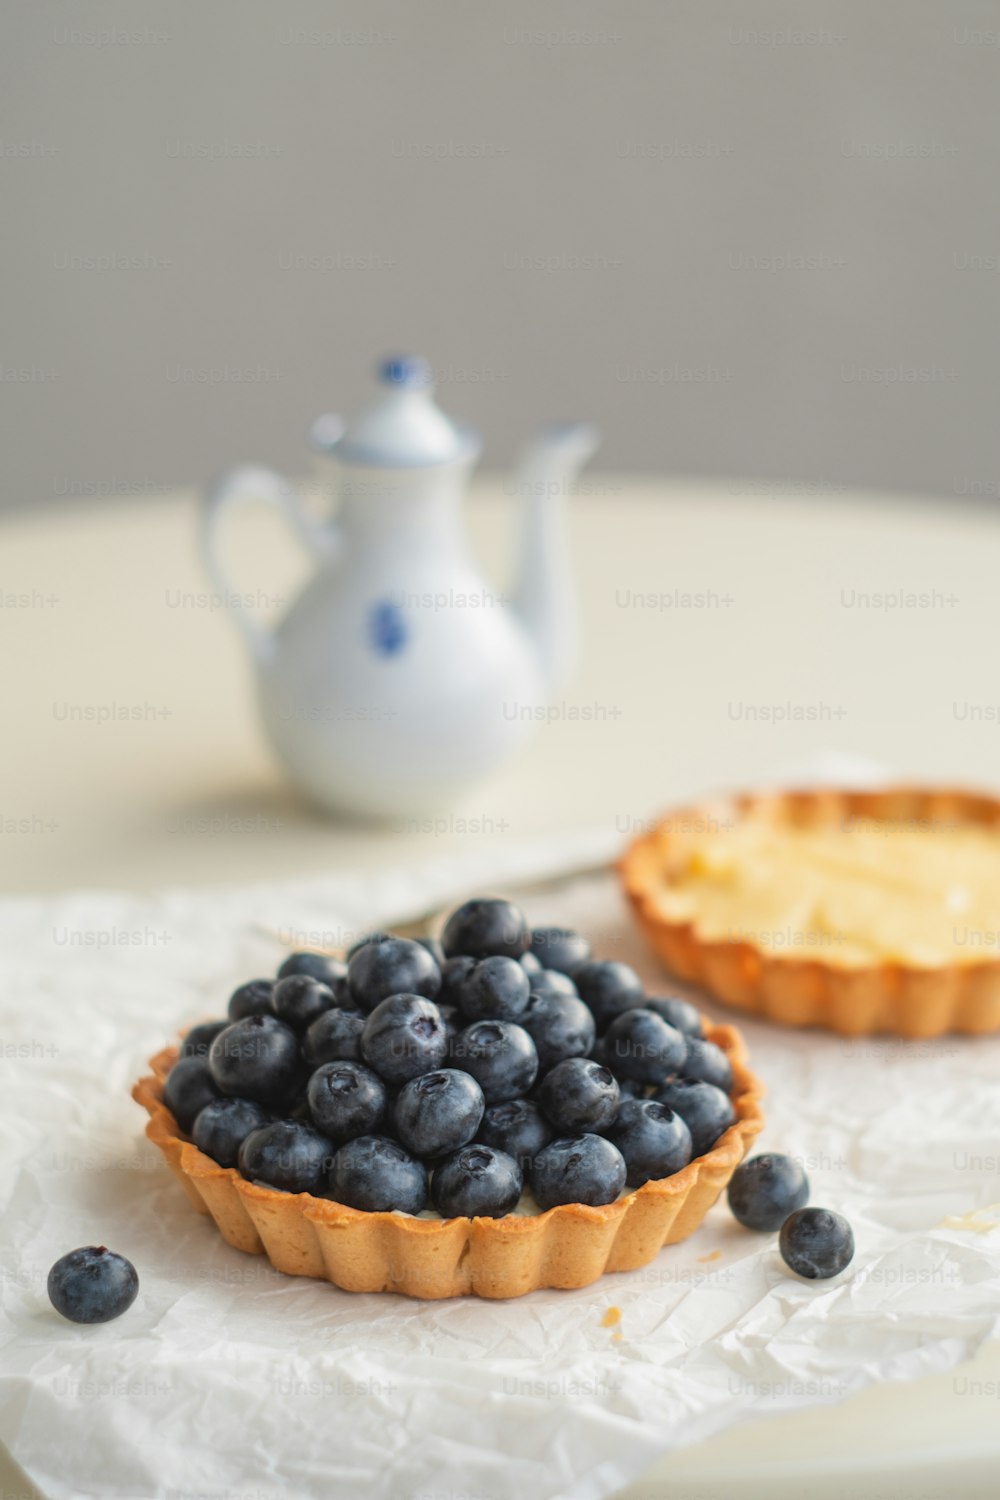 a tart with blueberries and a cup of tea